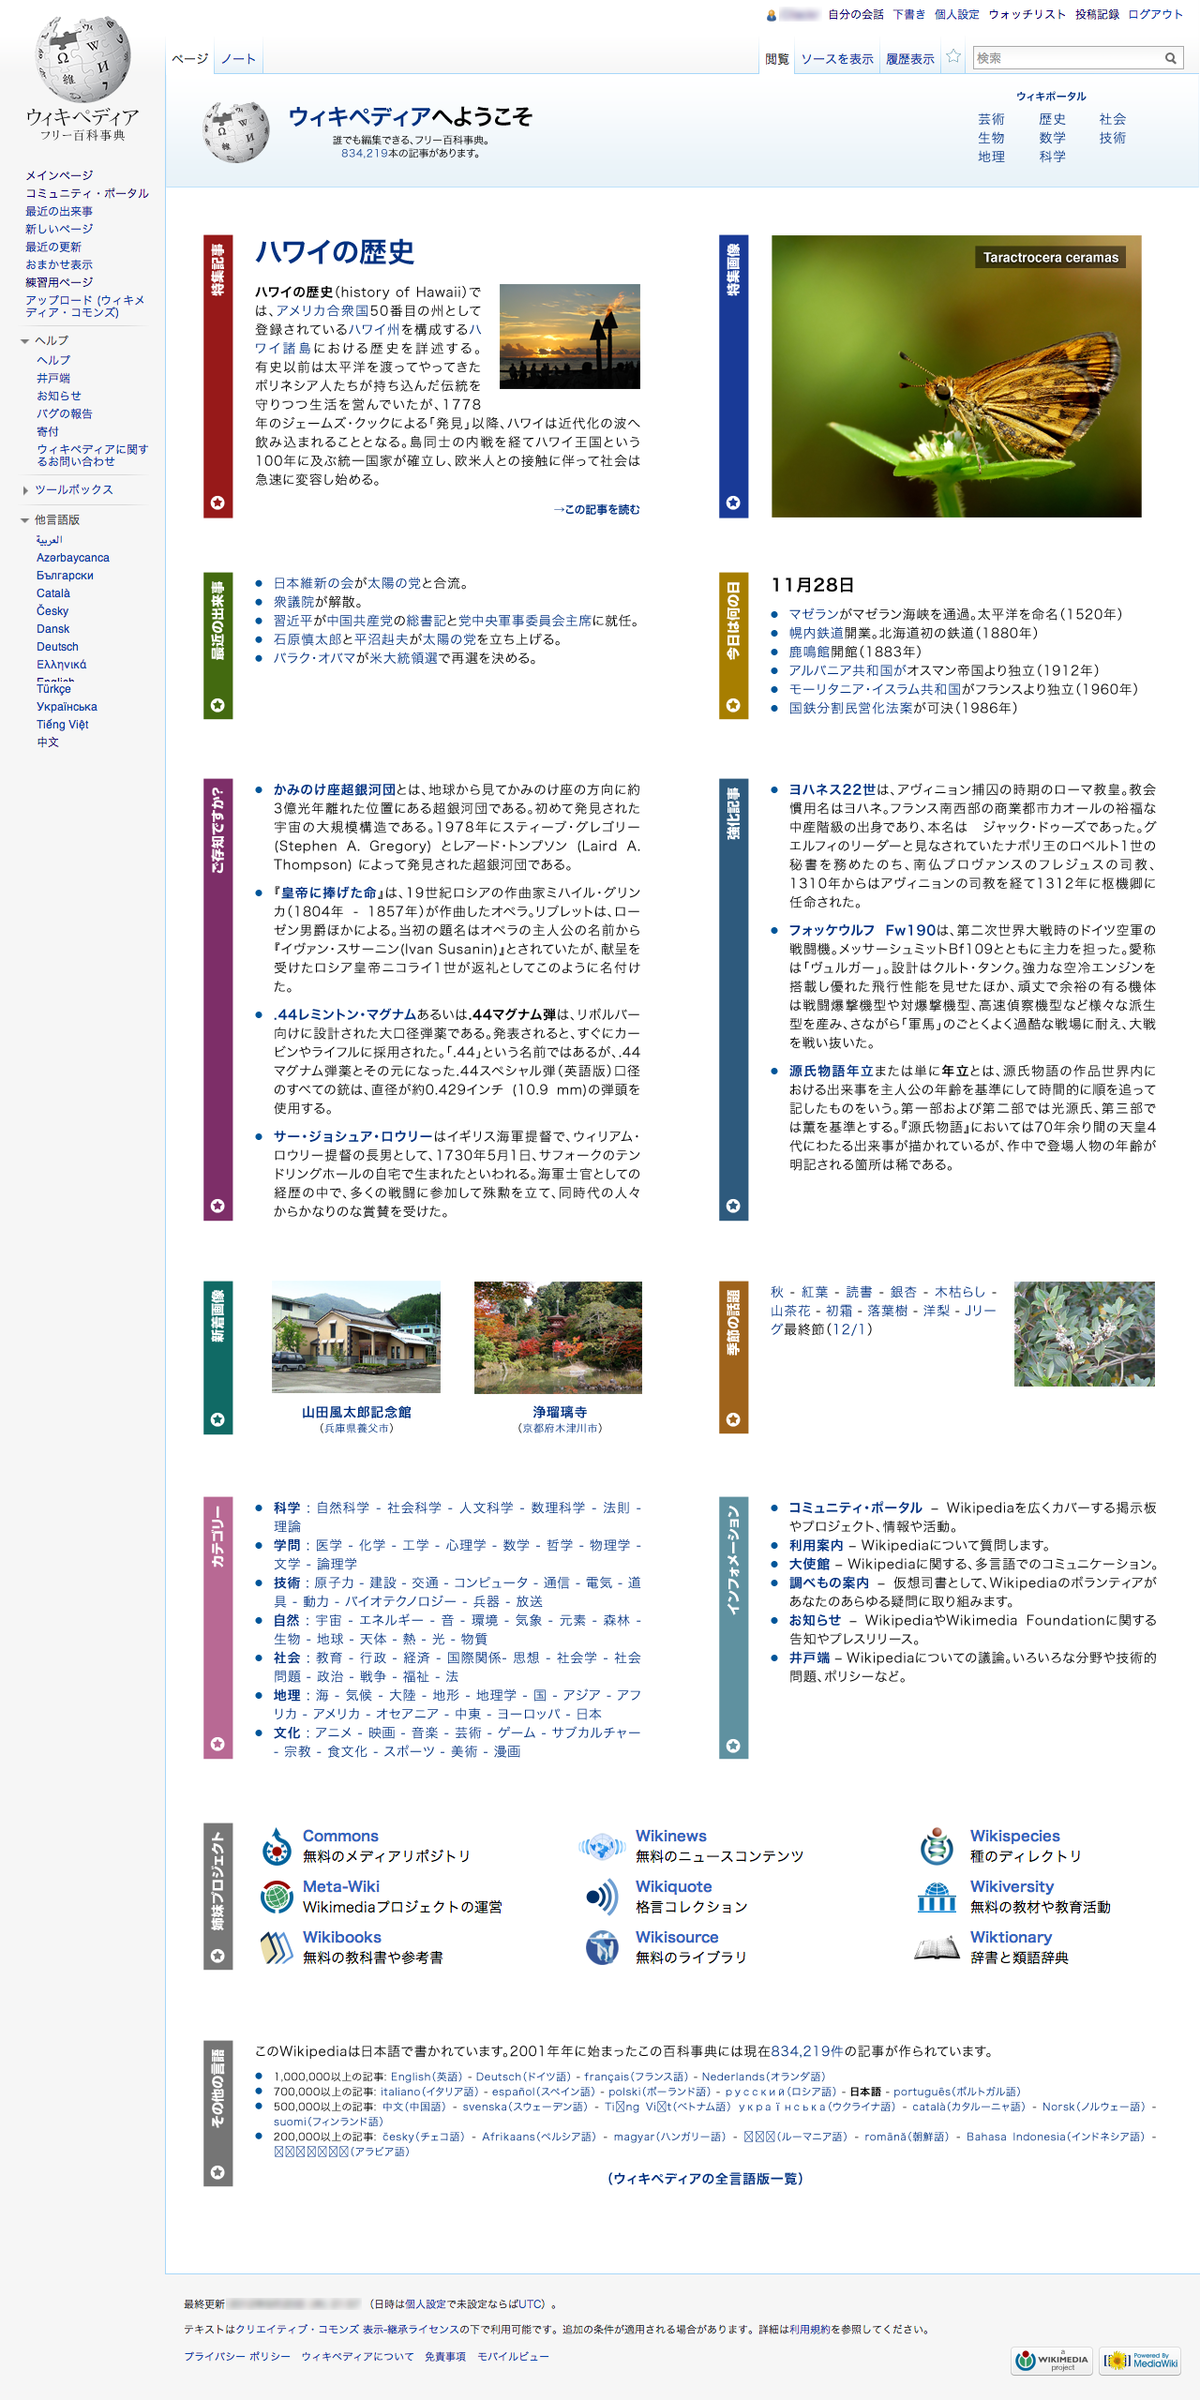 File Wikipedia Main Page Design 12 Draft Cllackr Png Wikimedia Commons